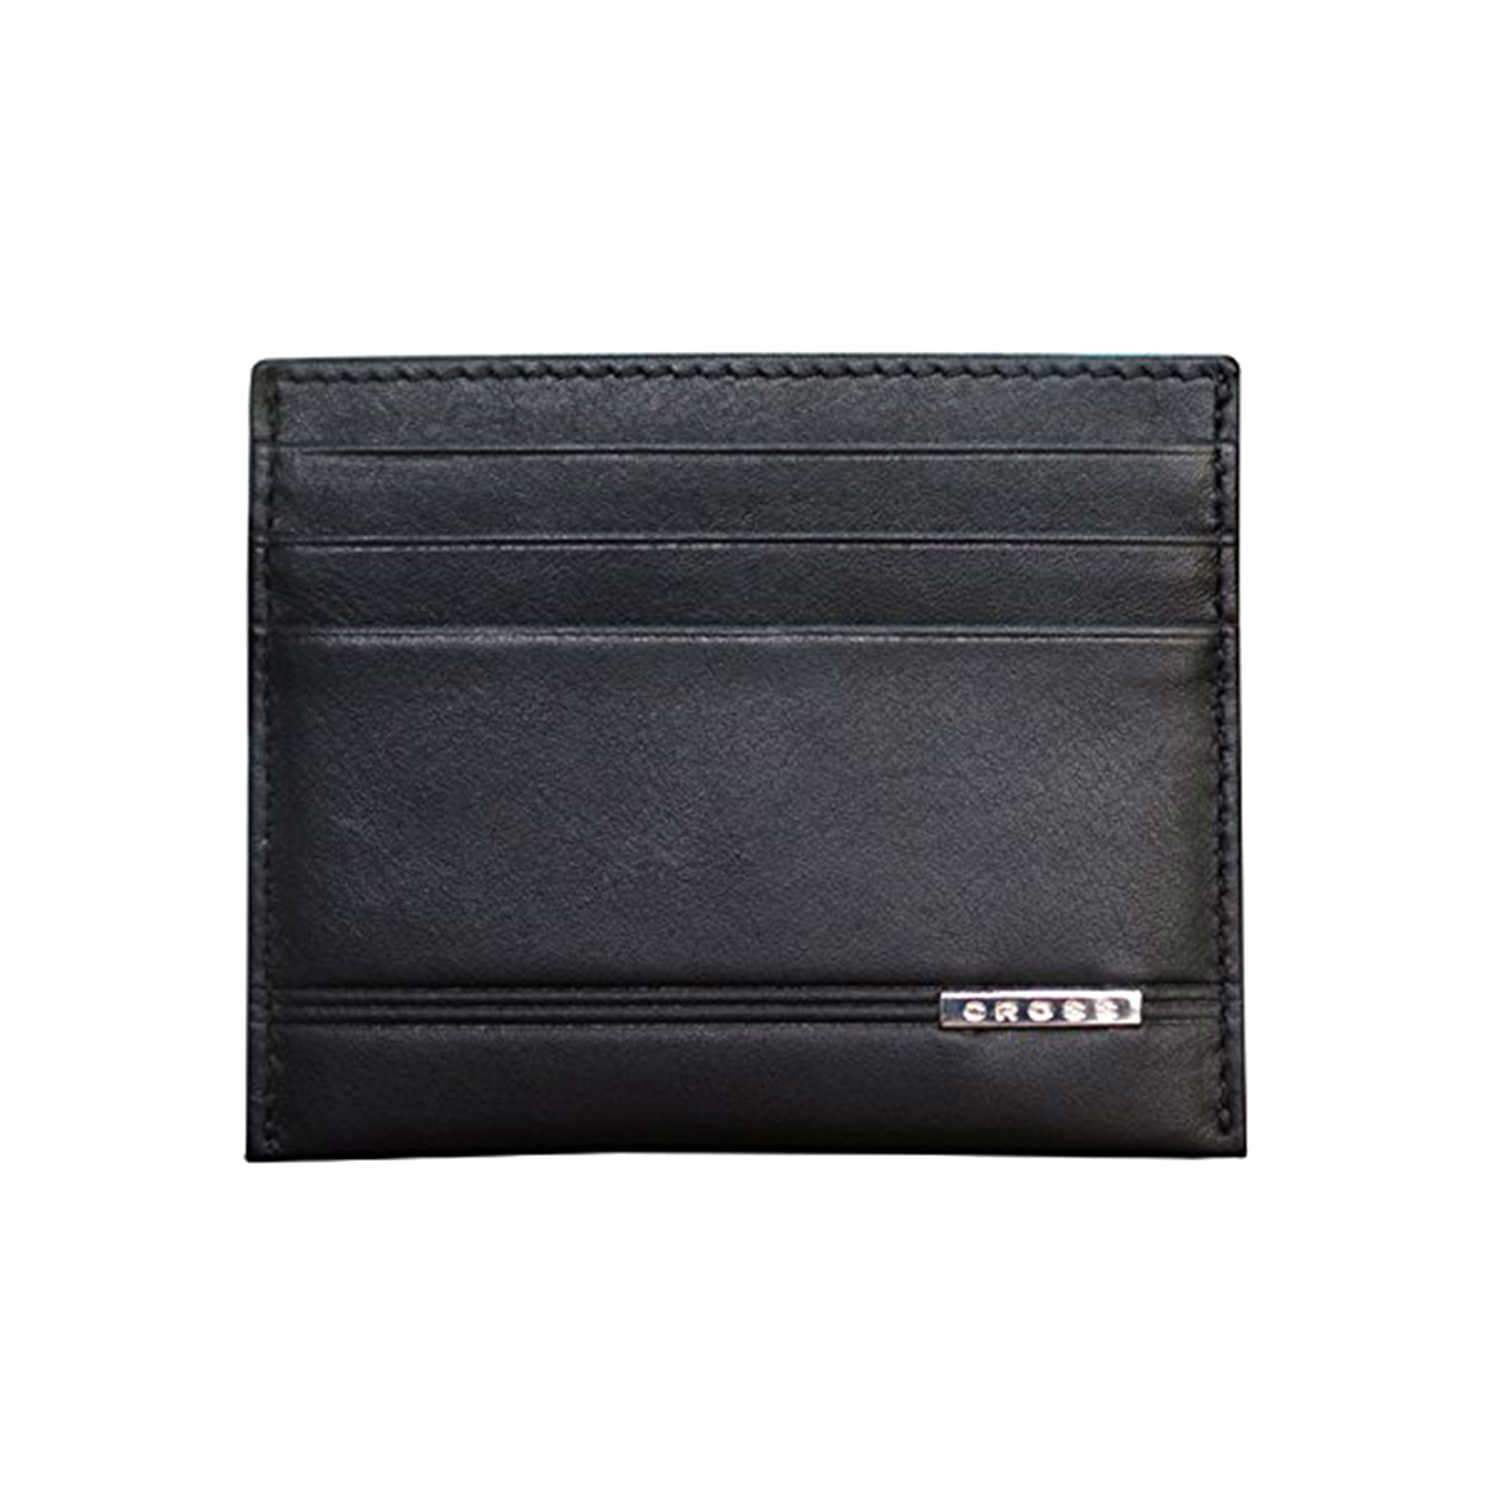 Cross Classic Century Credit Card Case for Men Leather Black - AC018257-1-1 - Jashanmal Home